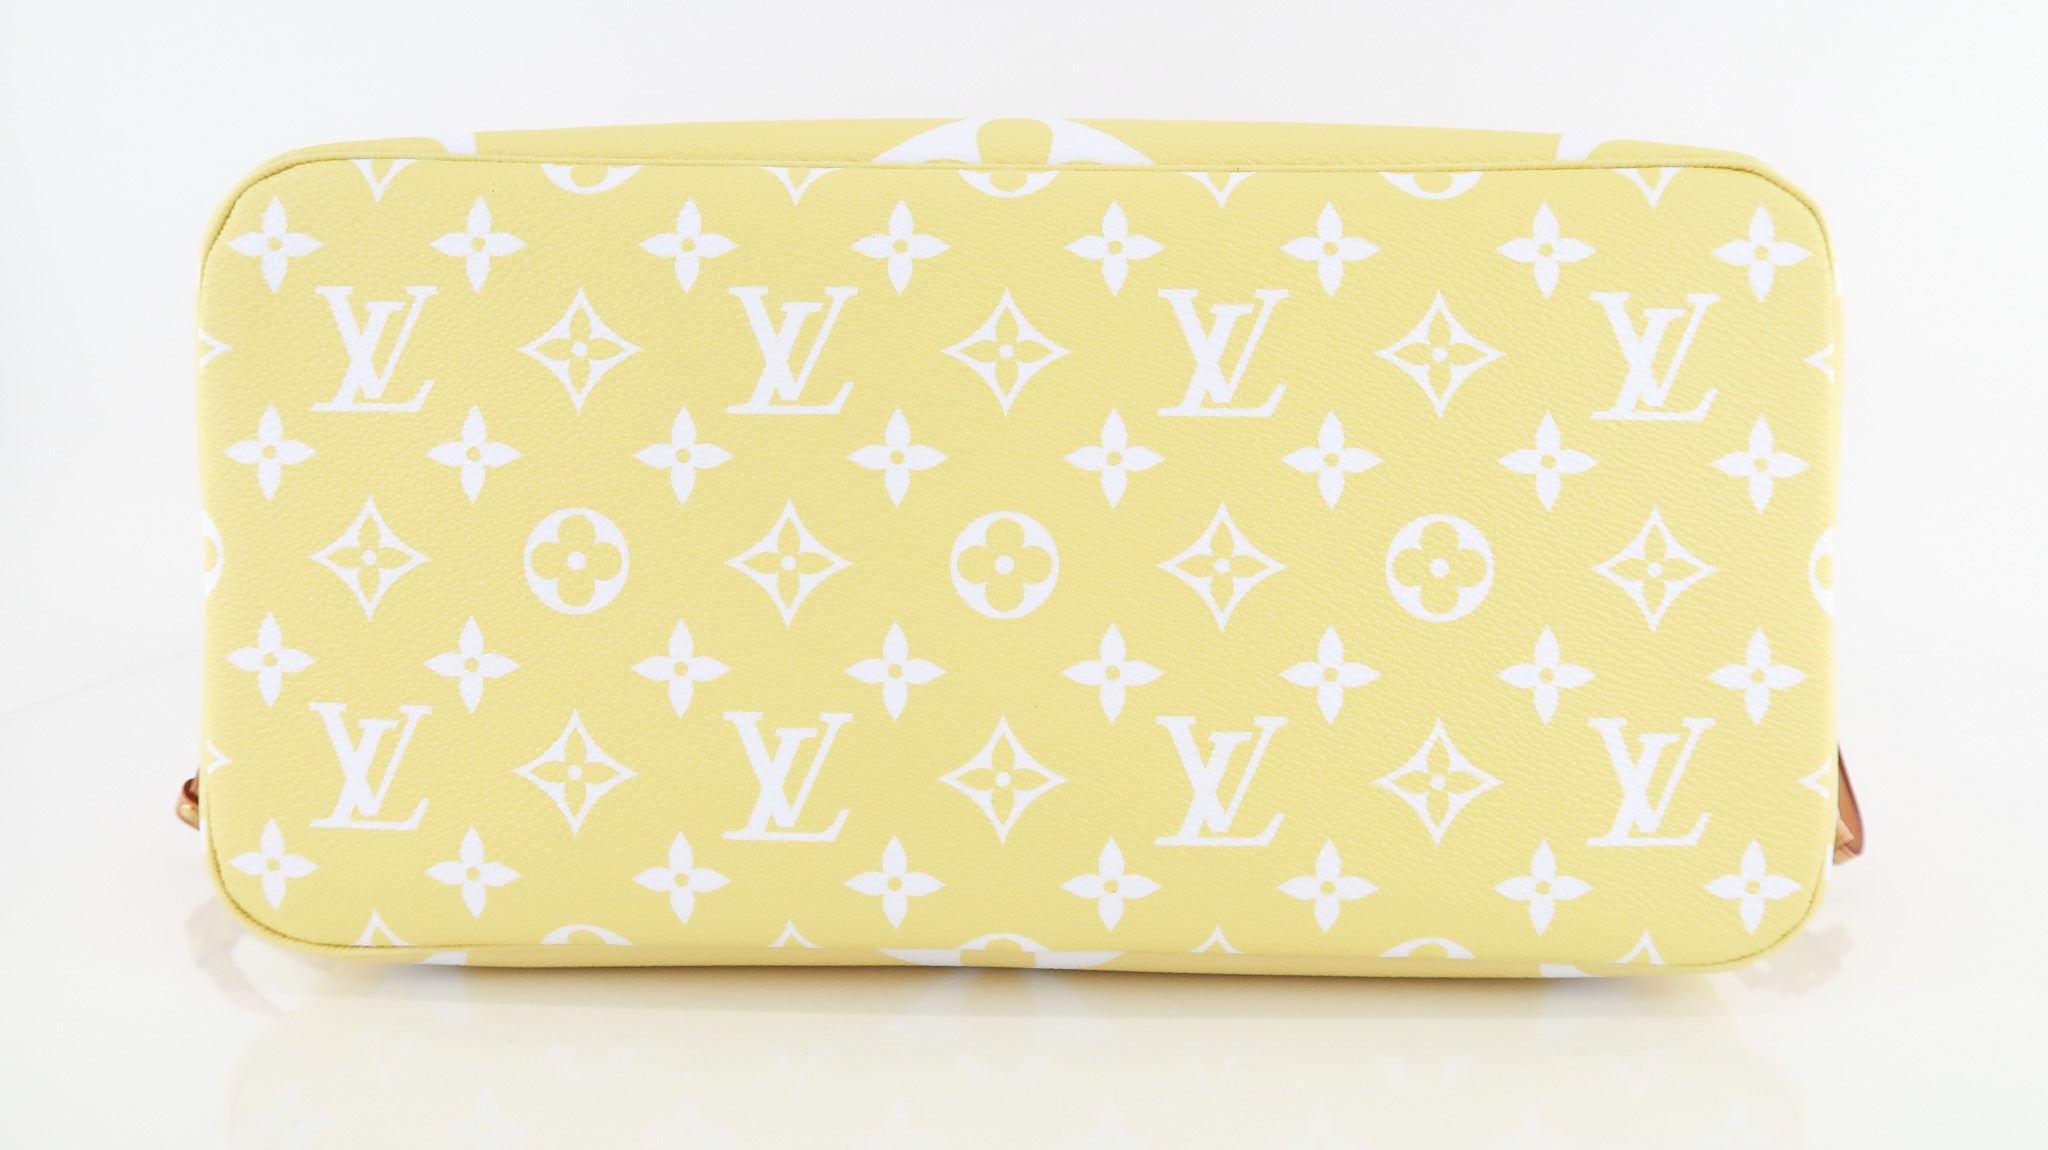 Louis Vuitton Pink Yellow Monogram By the Pool Neverfull MM Tote